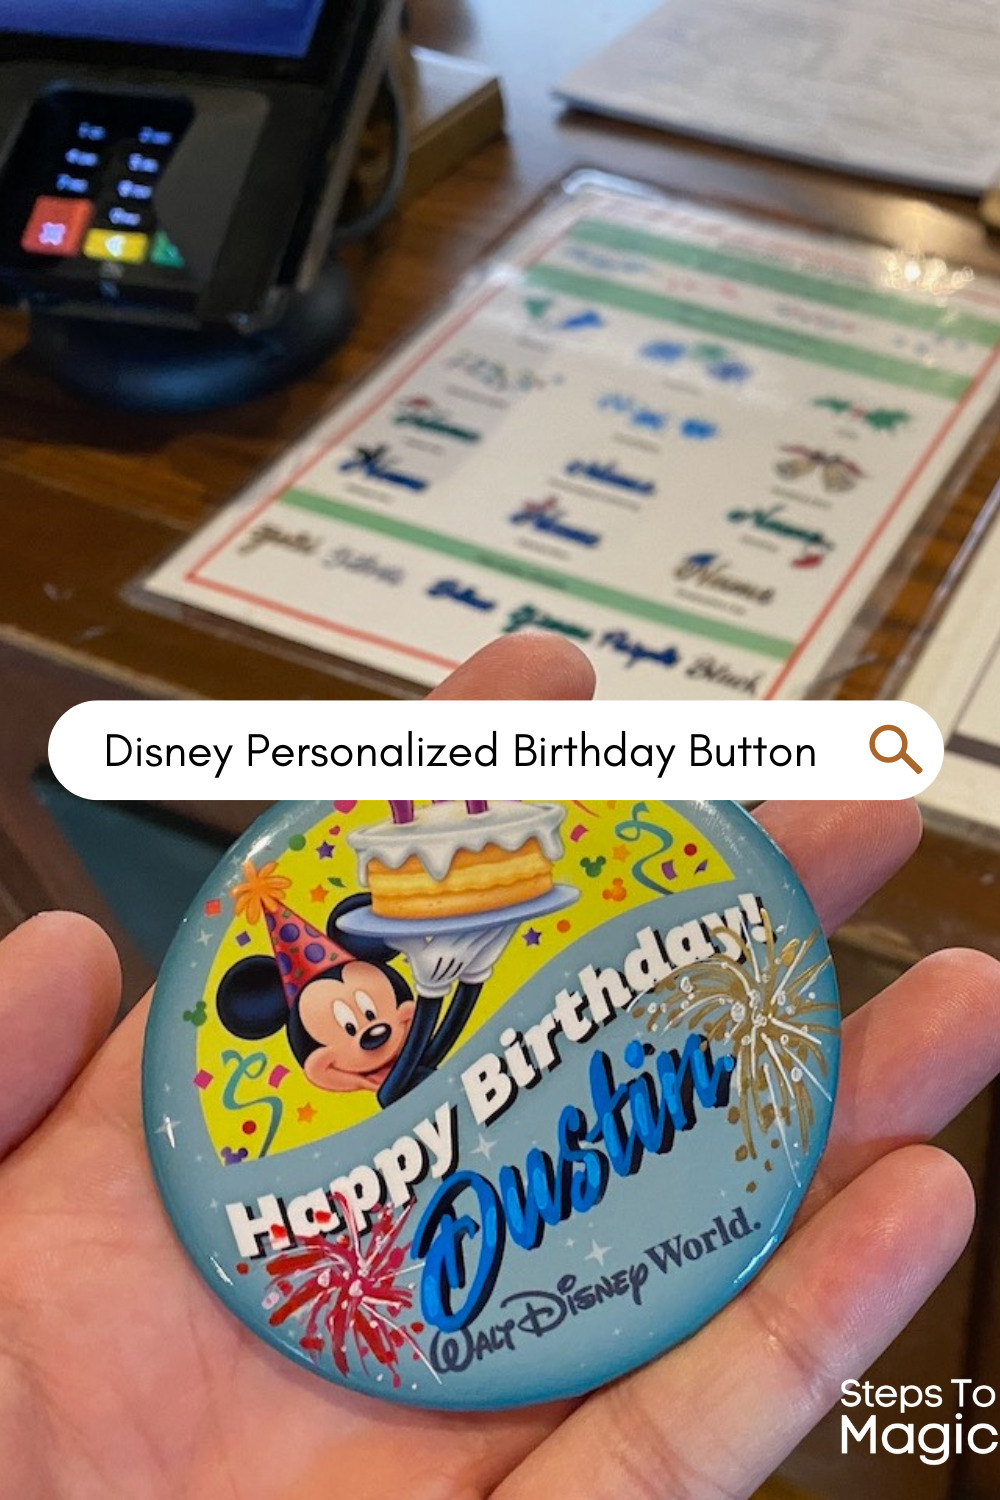 How to get a Personalized Birthday Button